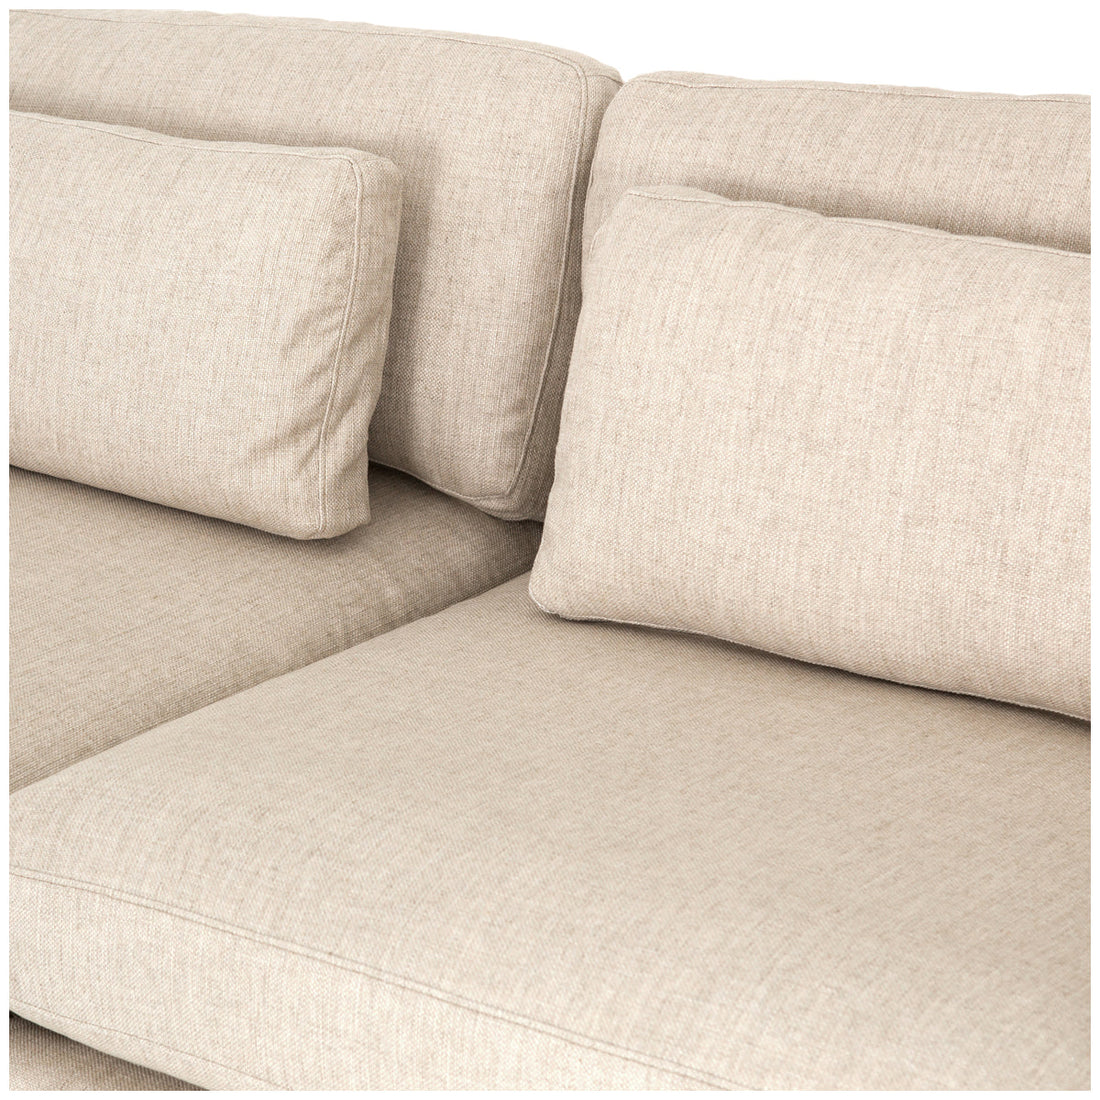 Four Hands Atelier Bloor 5-Piece Natural Sectional with Ottoman